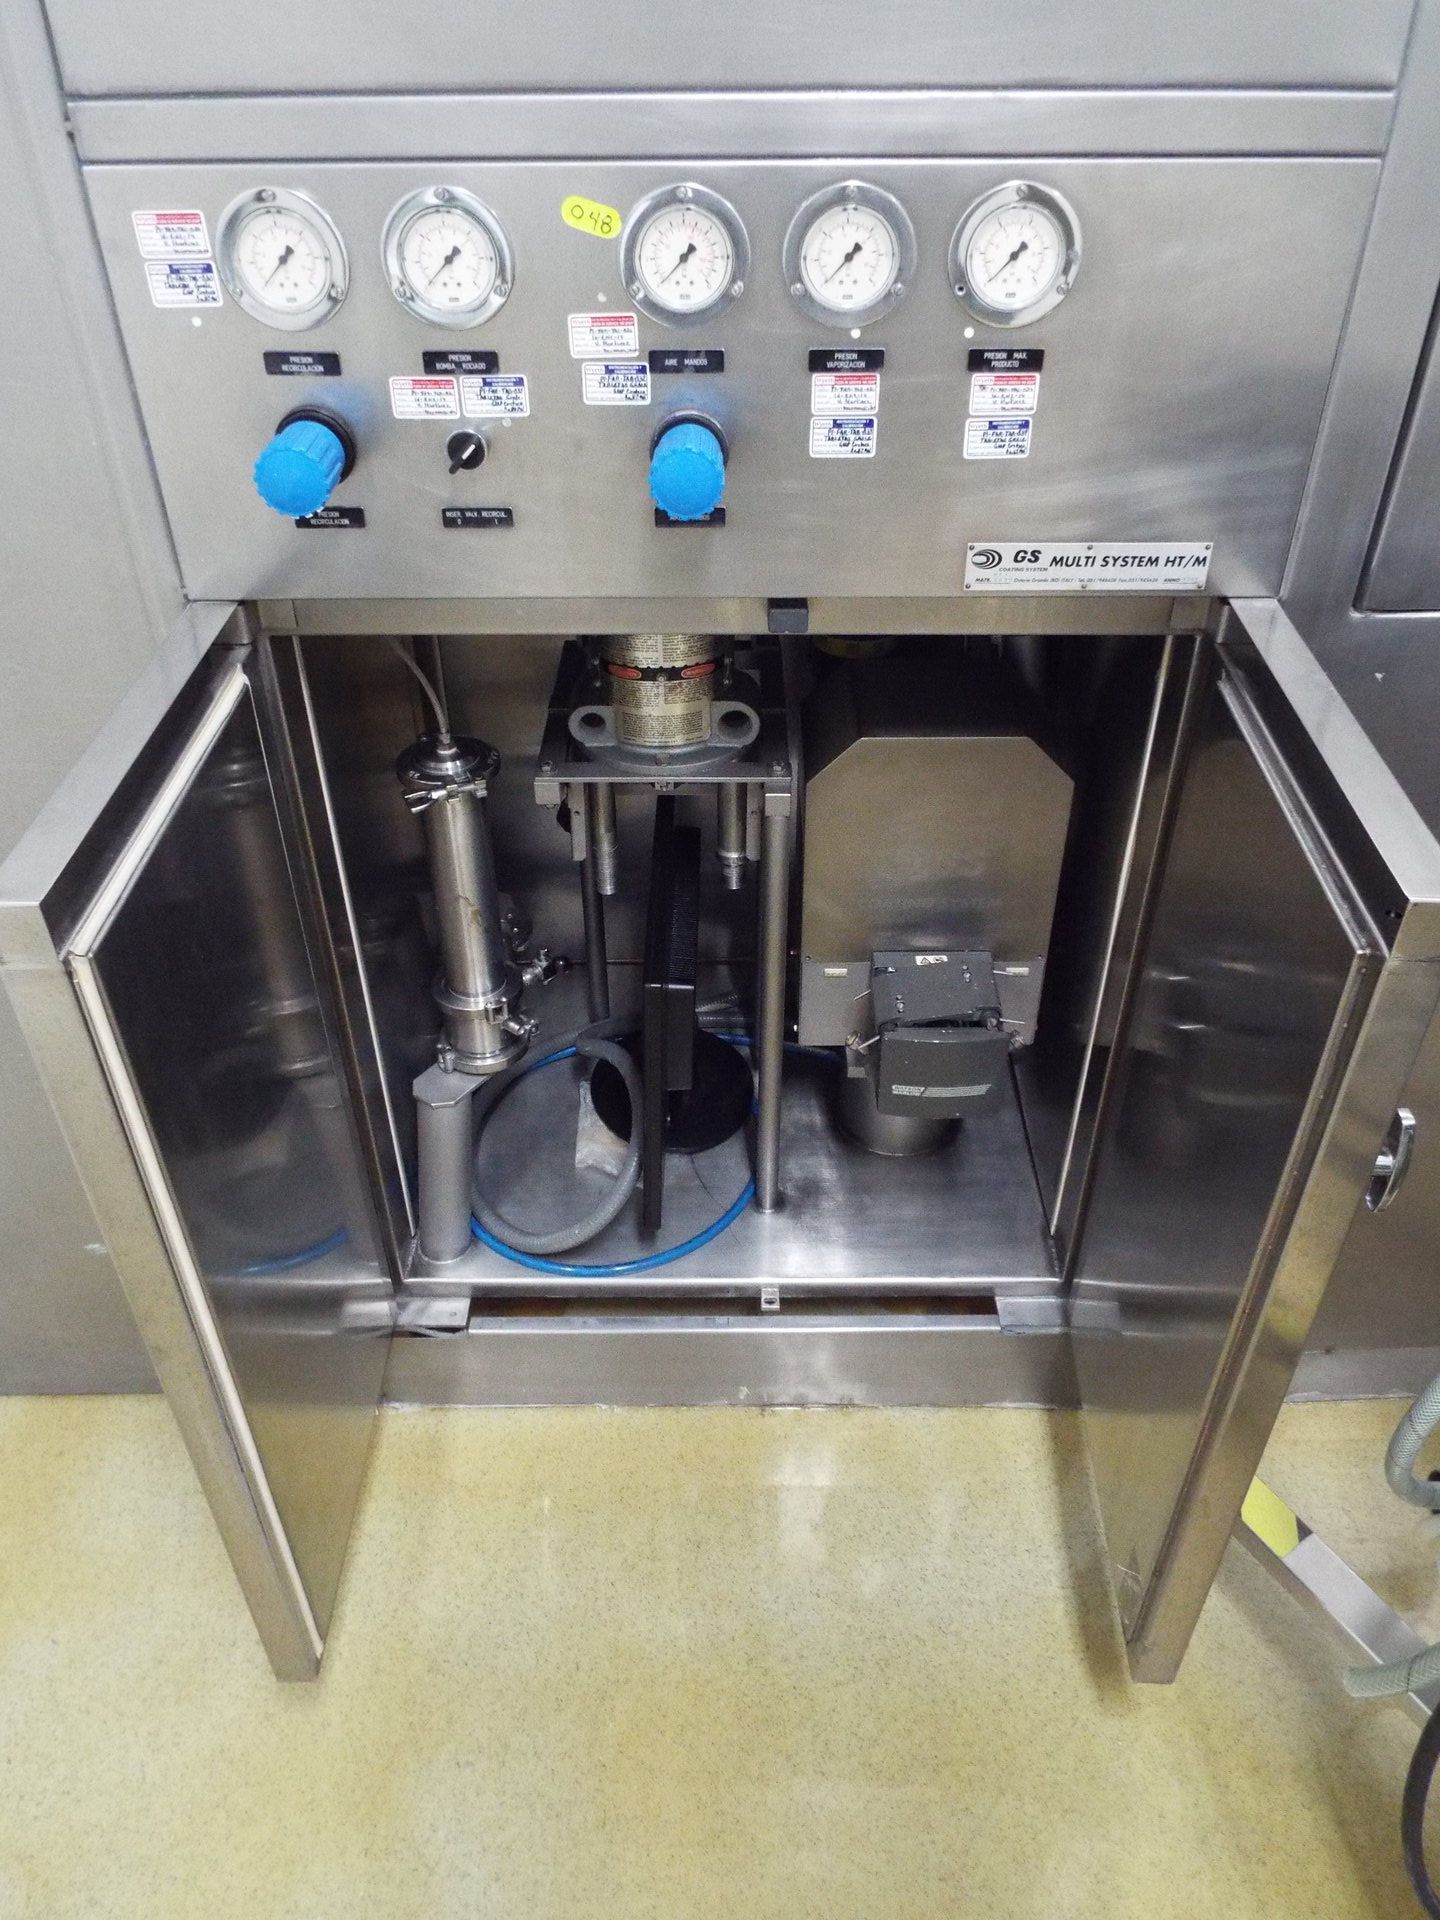 Pellegrini stainless steel 48" model HT-MT150 coating system with 2 spray pumps nozzles and cip pump - Image 9 of 17